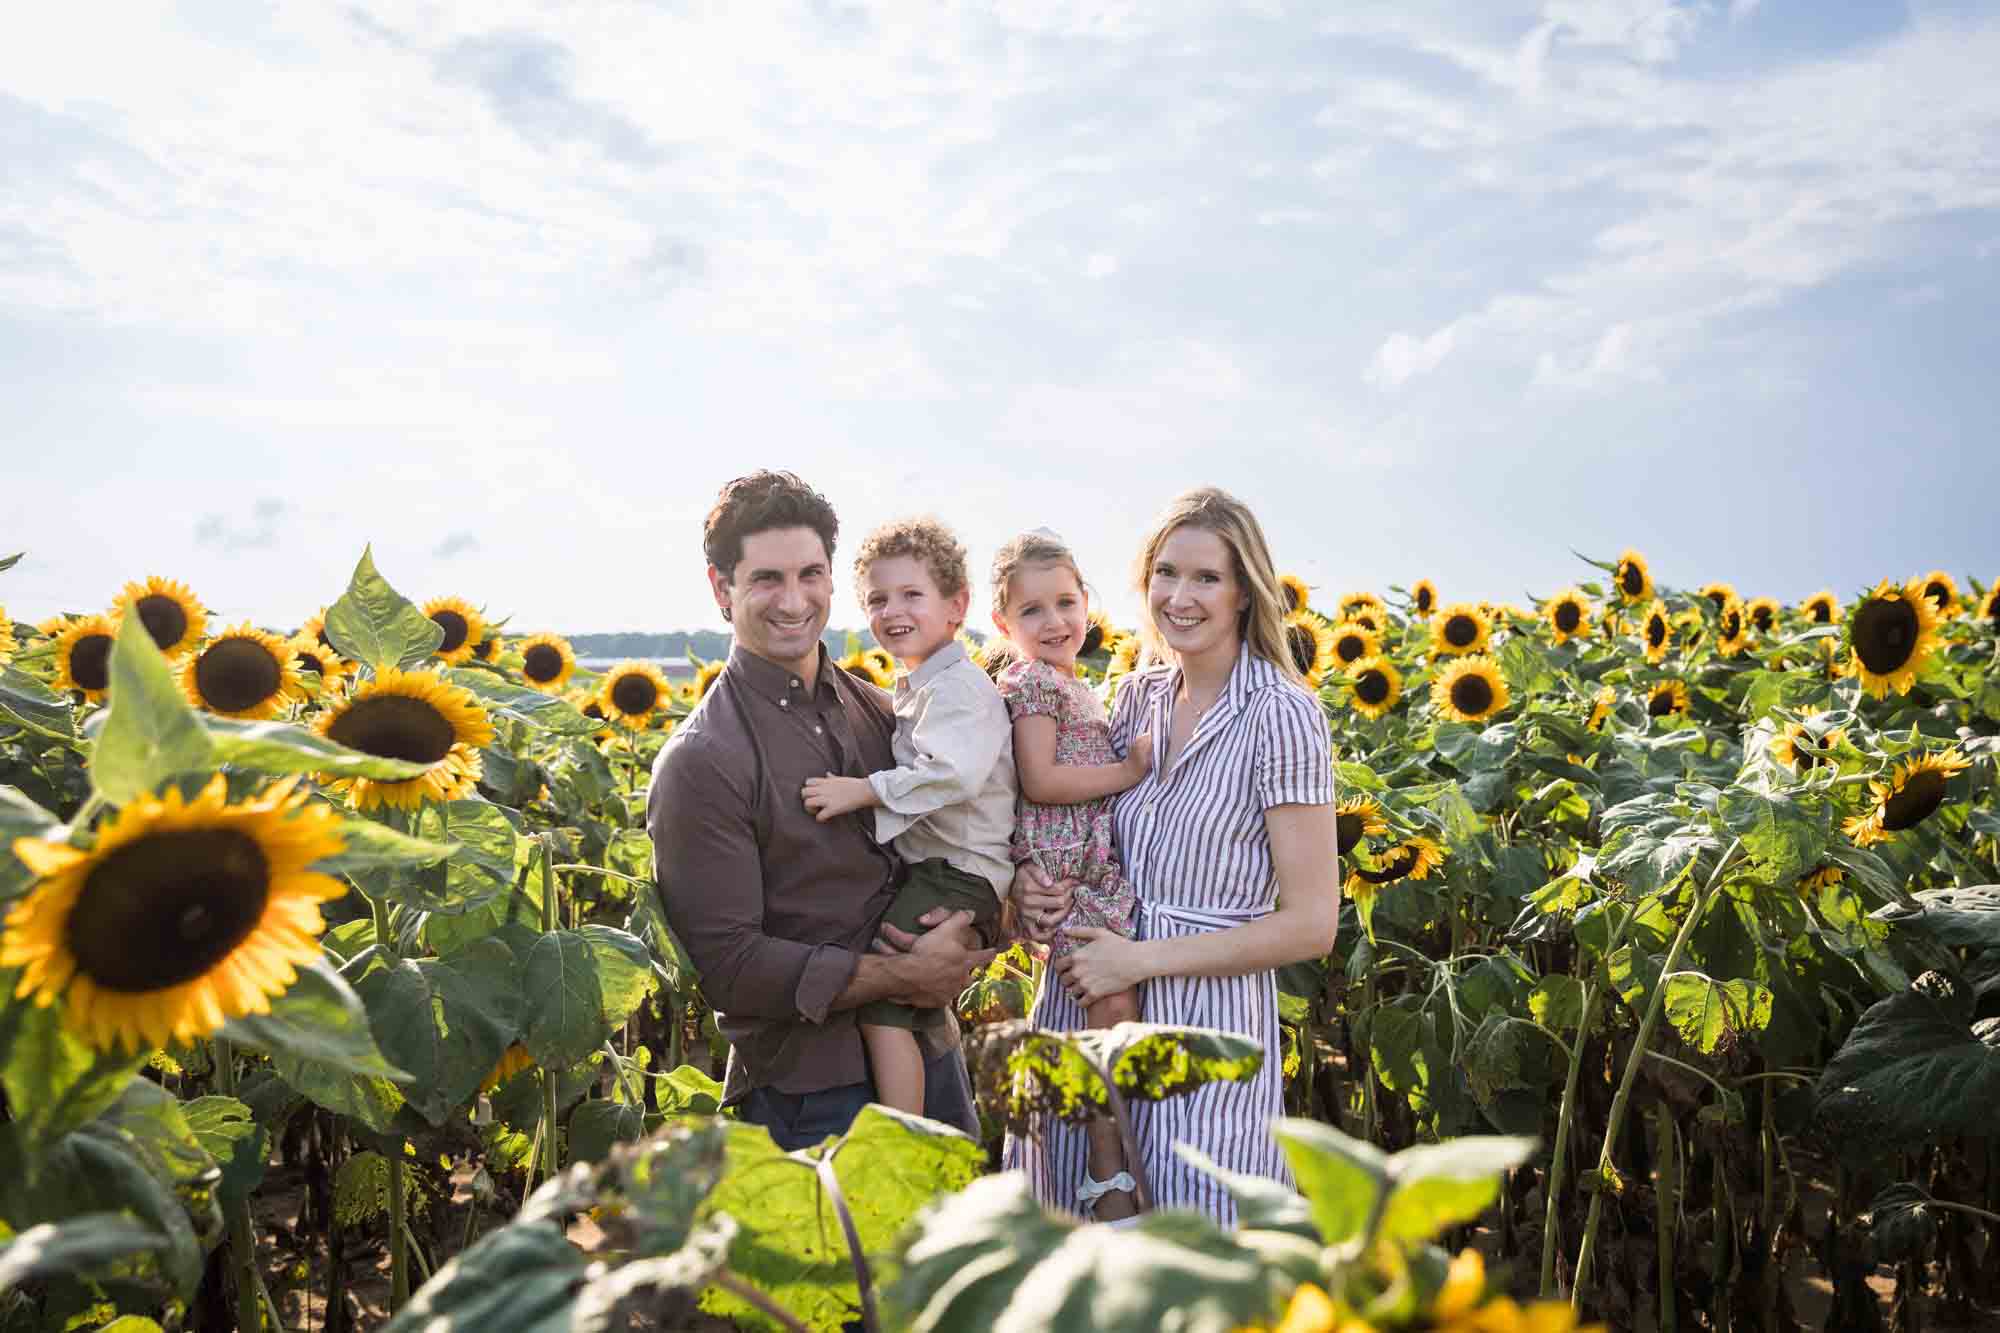 Parents holding two small children in sunflower patch 